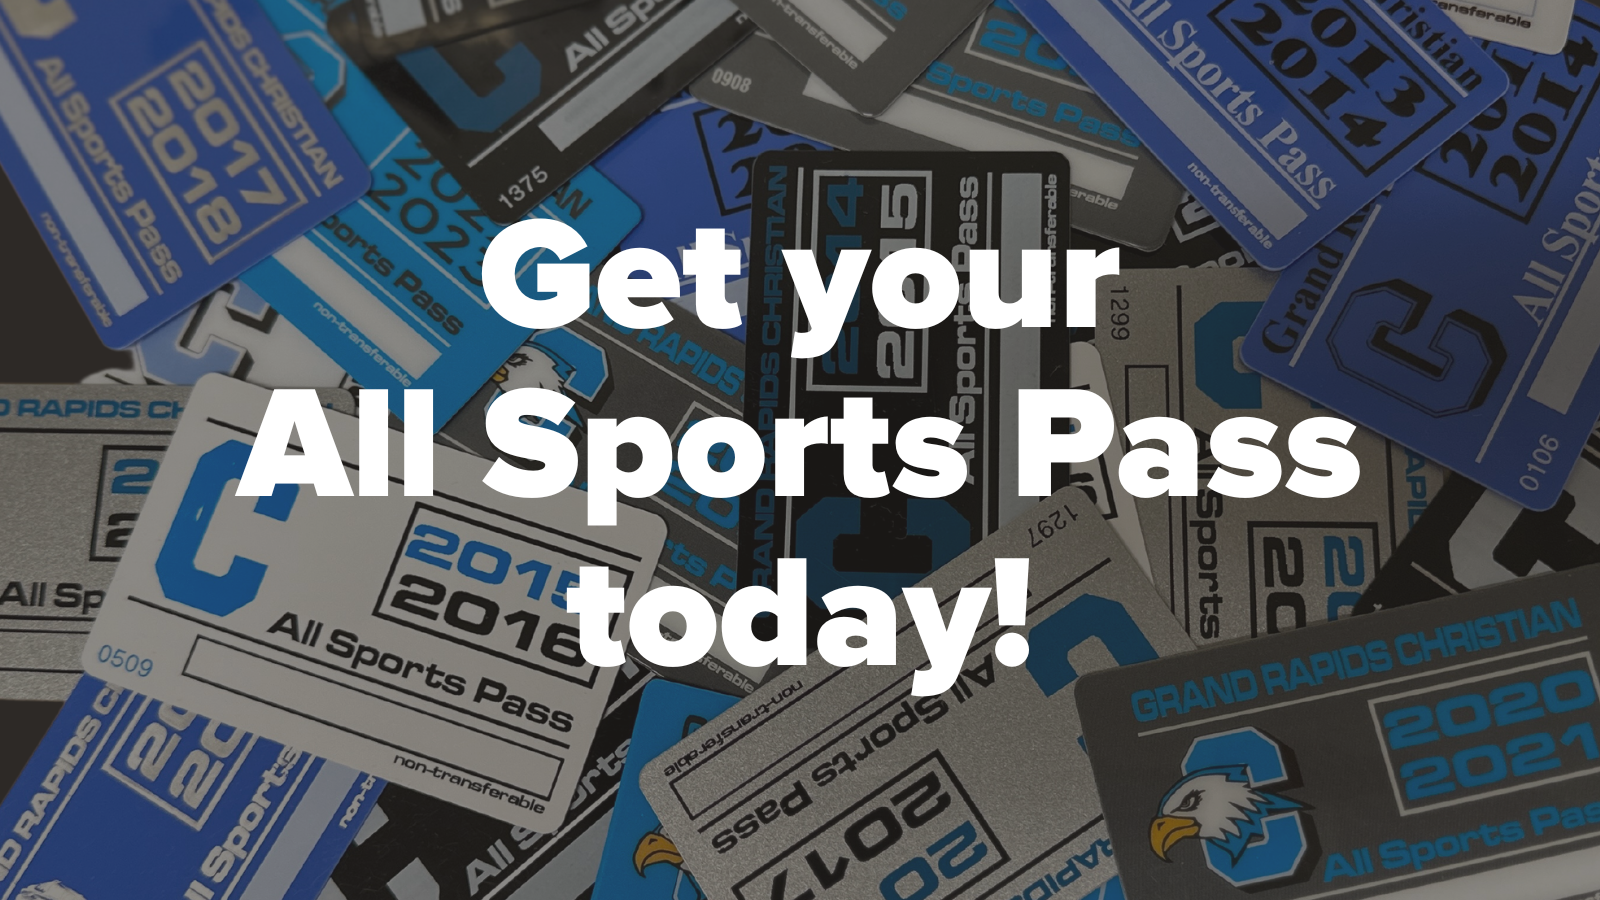 Get your all Sports Pass today!